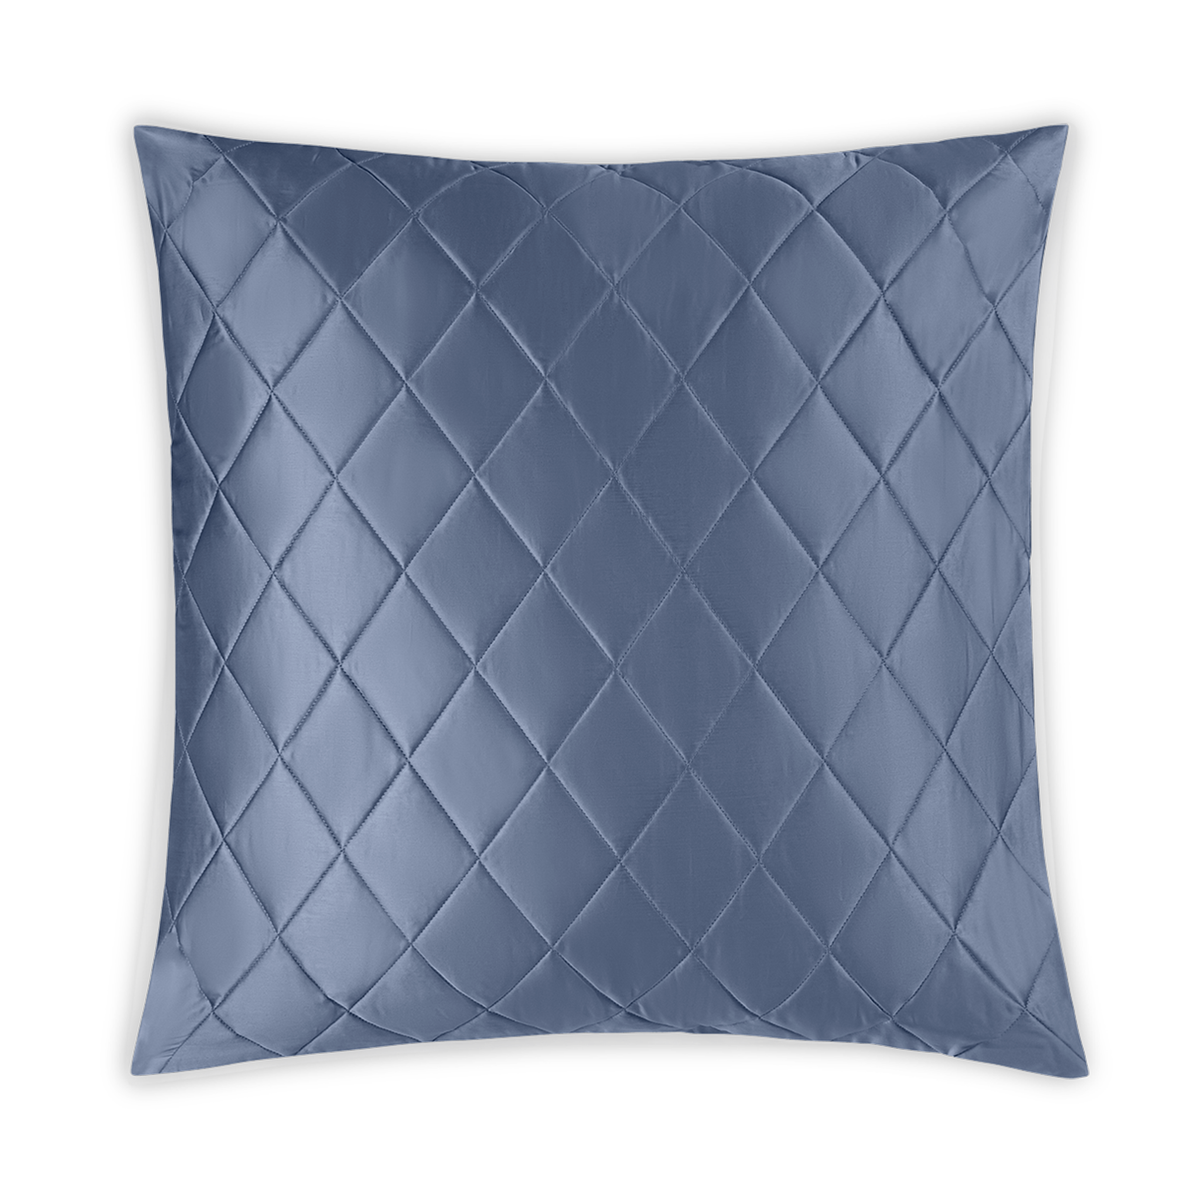 Silo Image of Matouk Nocturne Quilted Bedding Euro Sham in Steel Blue